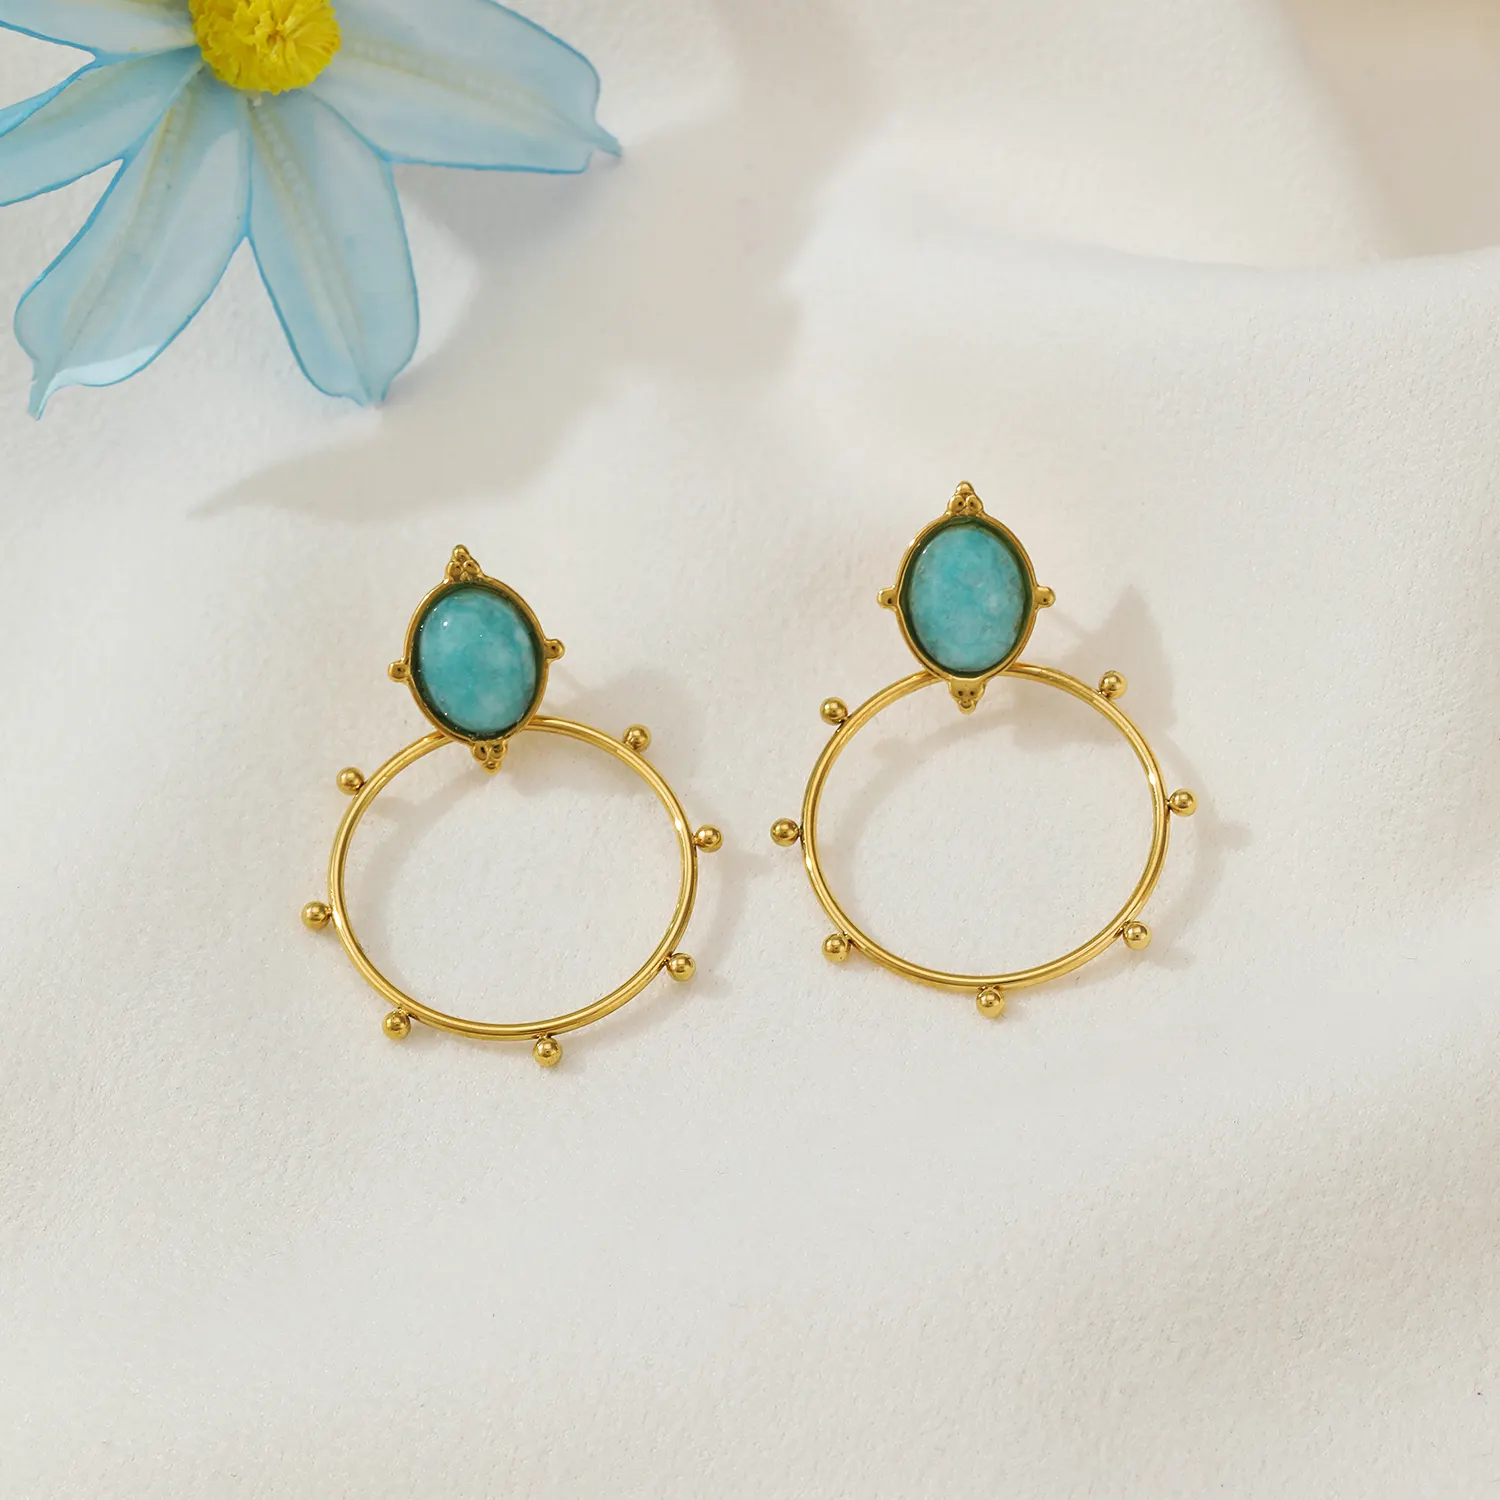 Customized New Product Gold Plated Women And Man Stainless Steel Sun Blue Turquoise Earrings 2022 Best Selling